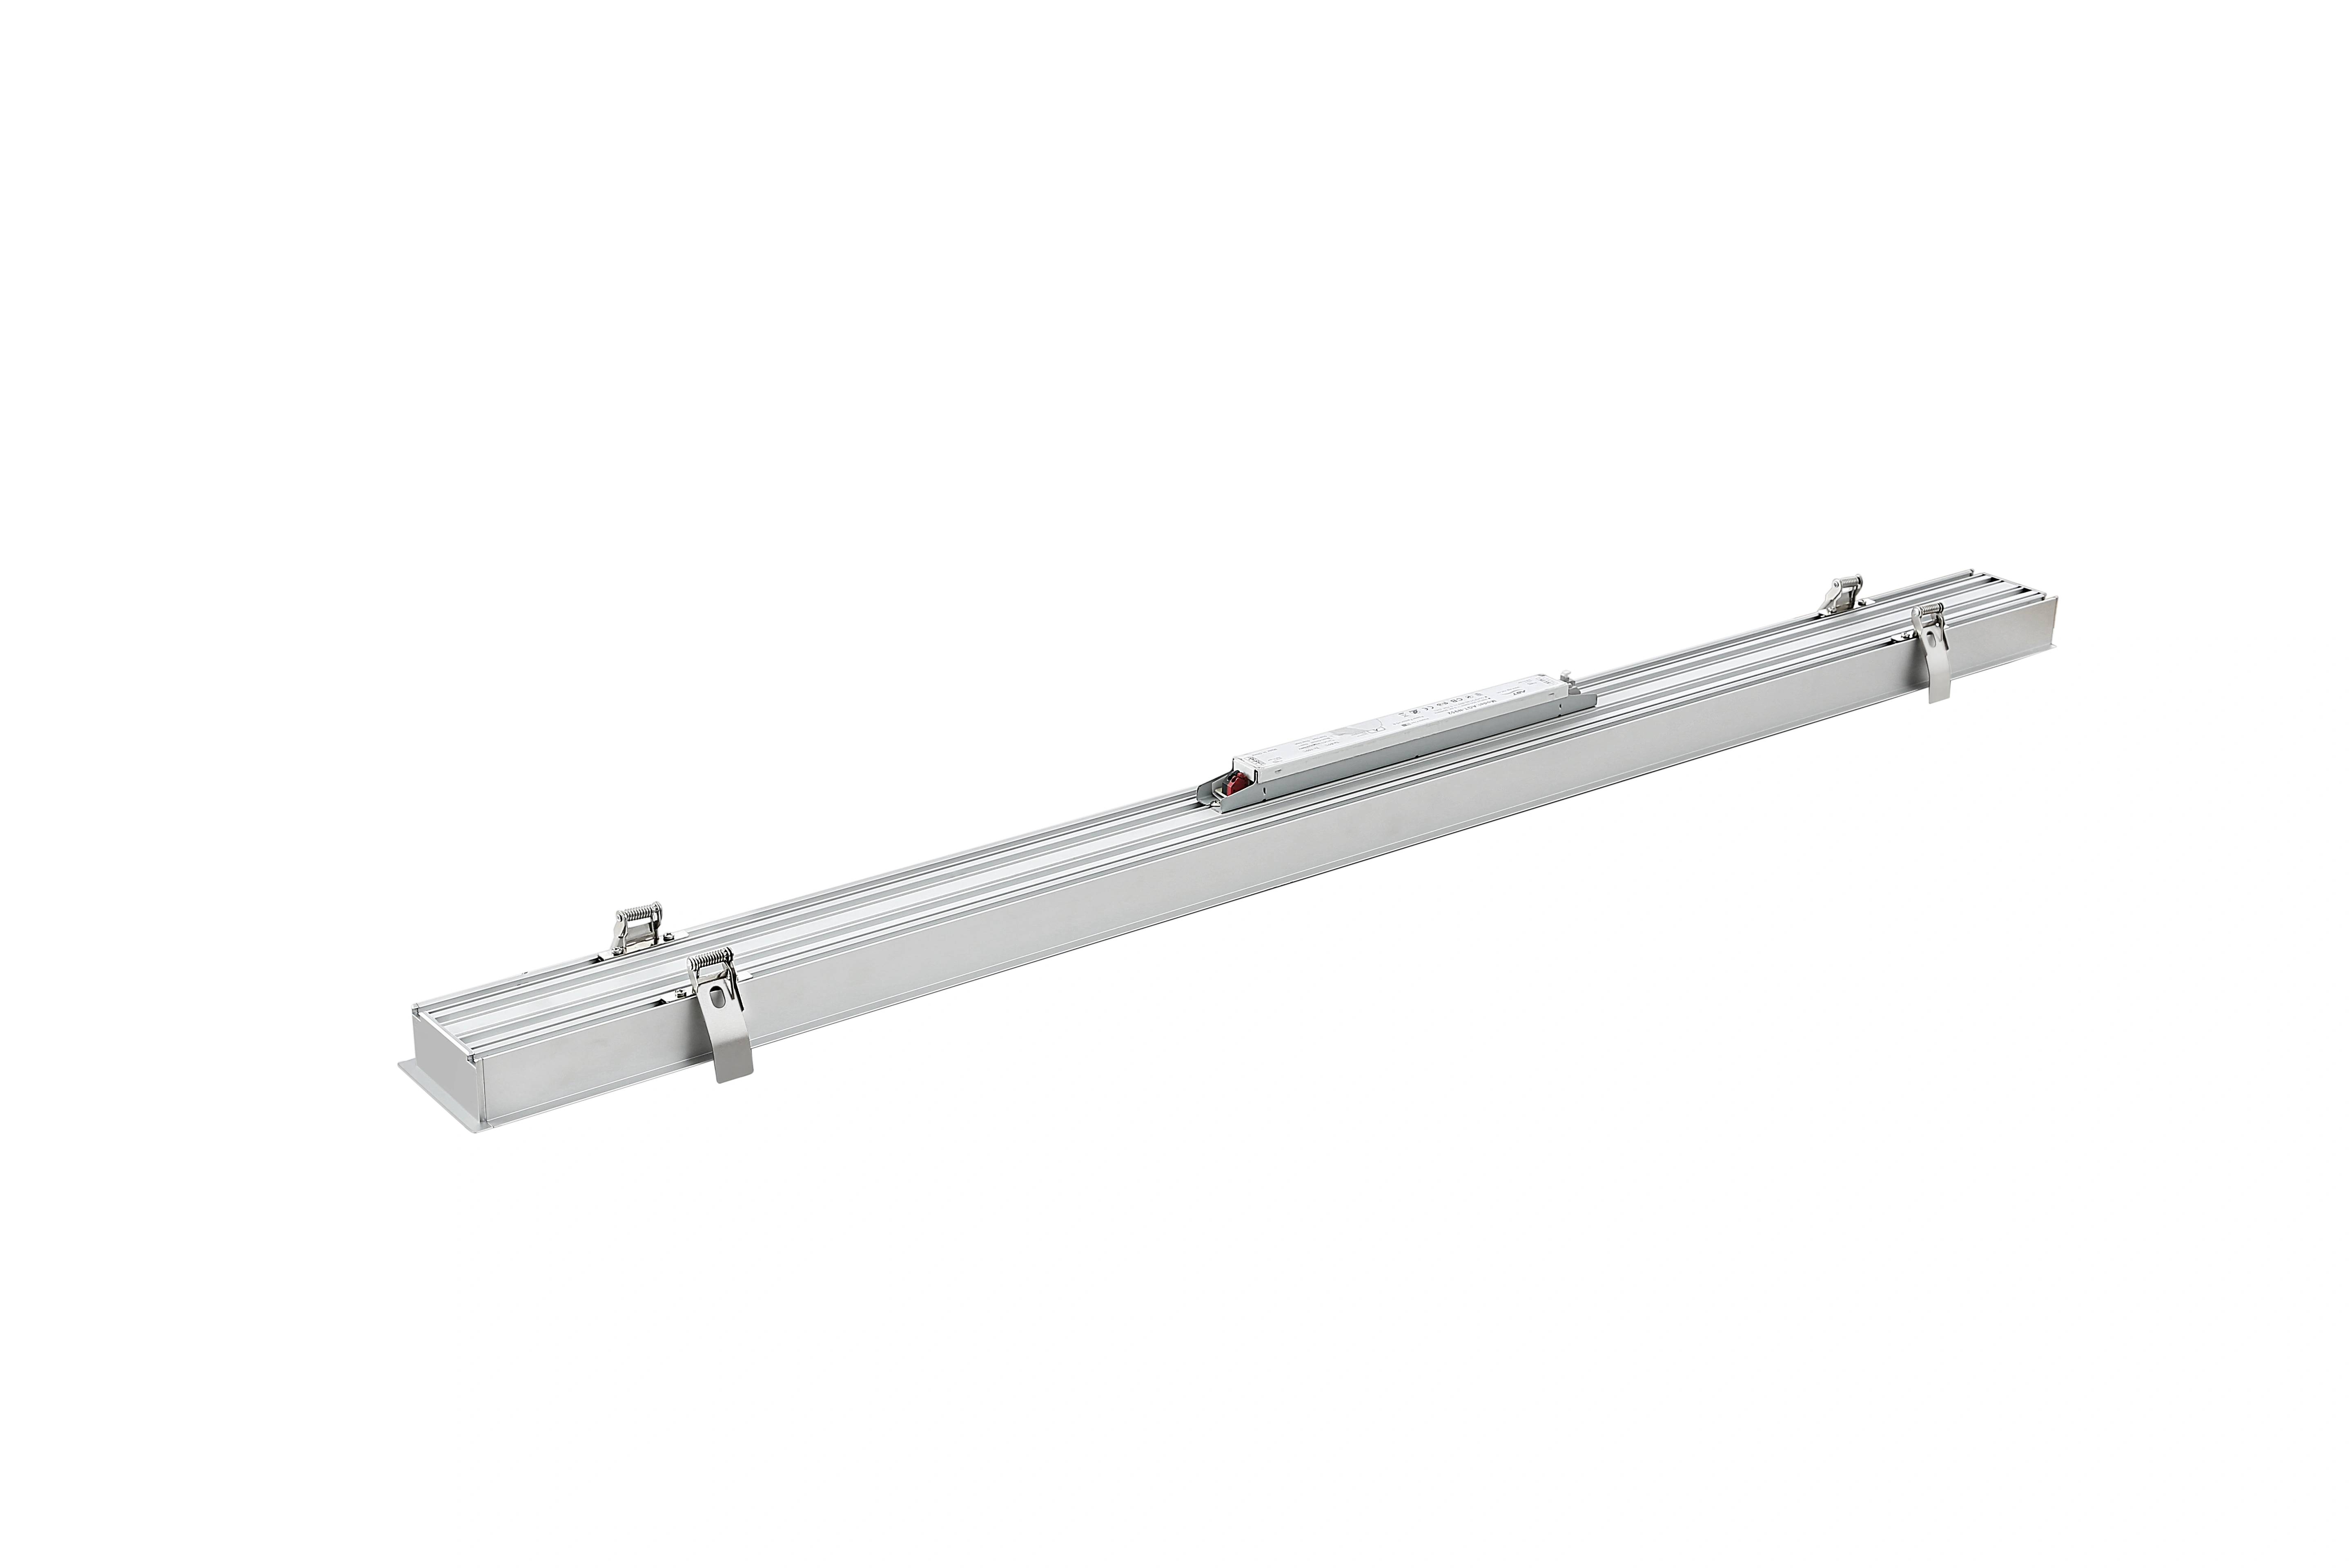 4ft High Performance Project Lighting Recessed Install Linkable Linear Led Lights for Supermarket